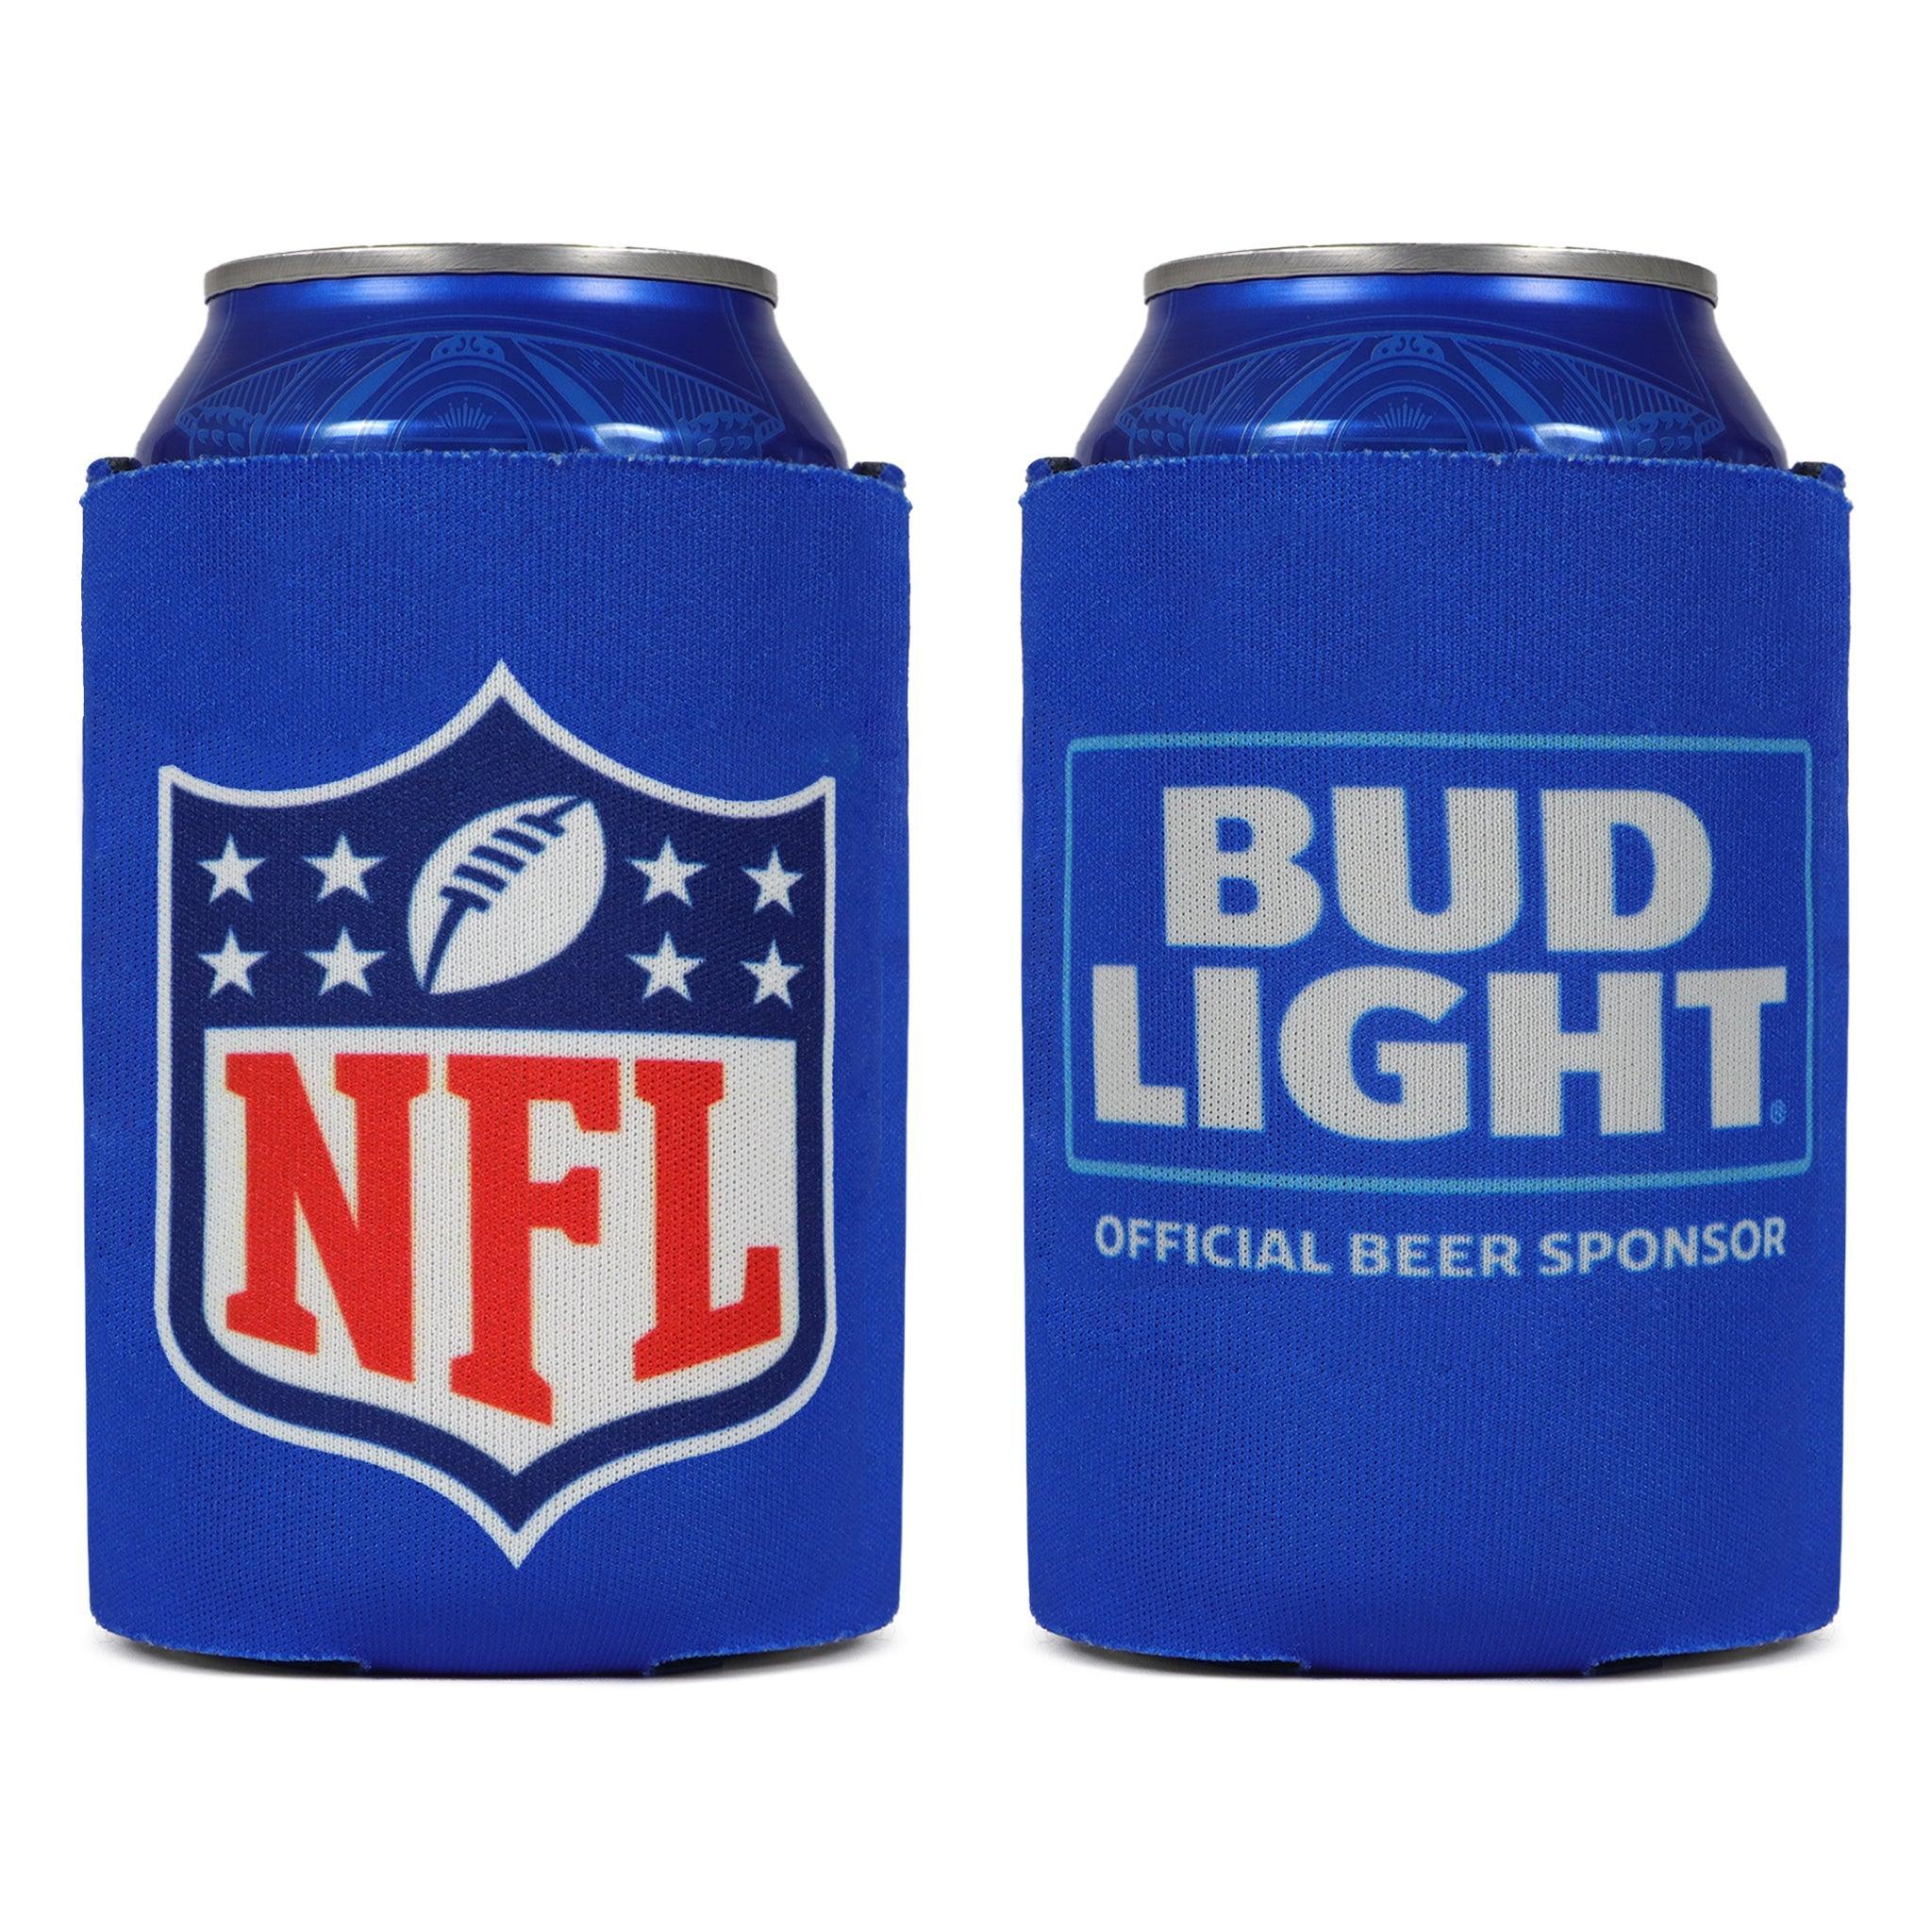 left image is NFL logo and right is Bud light logo